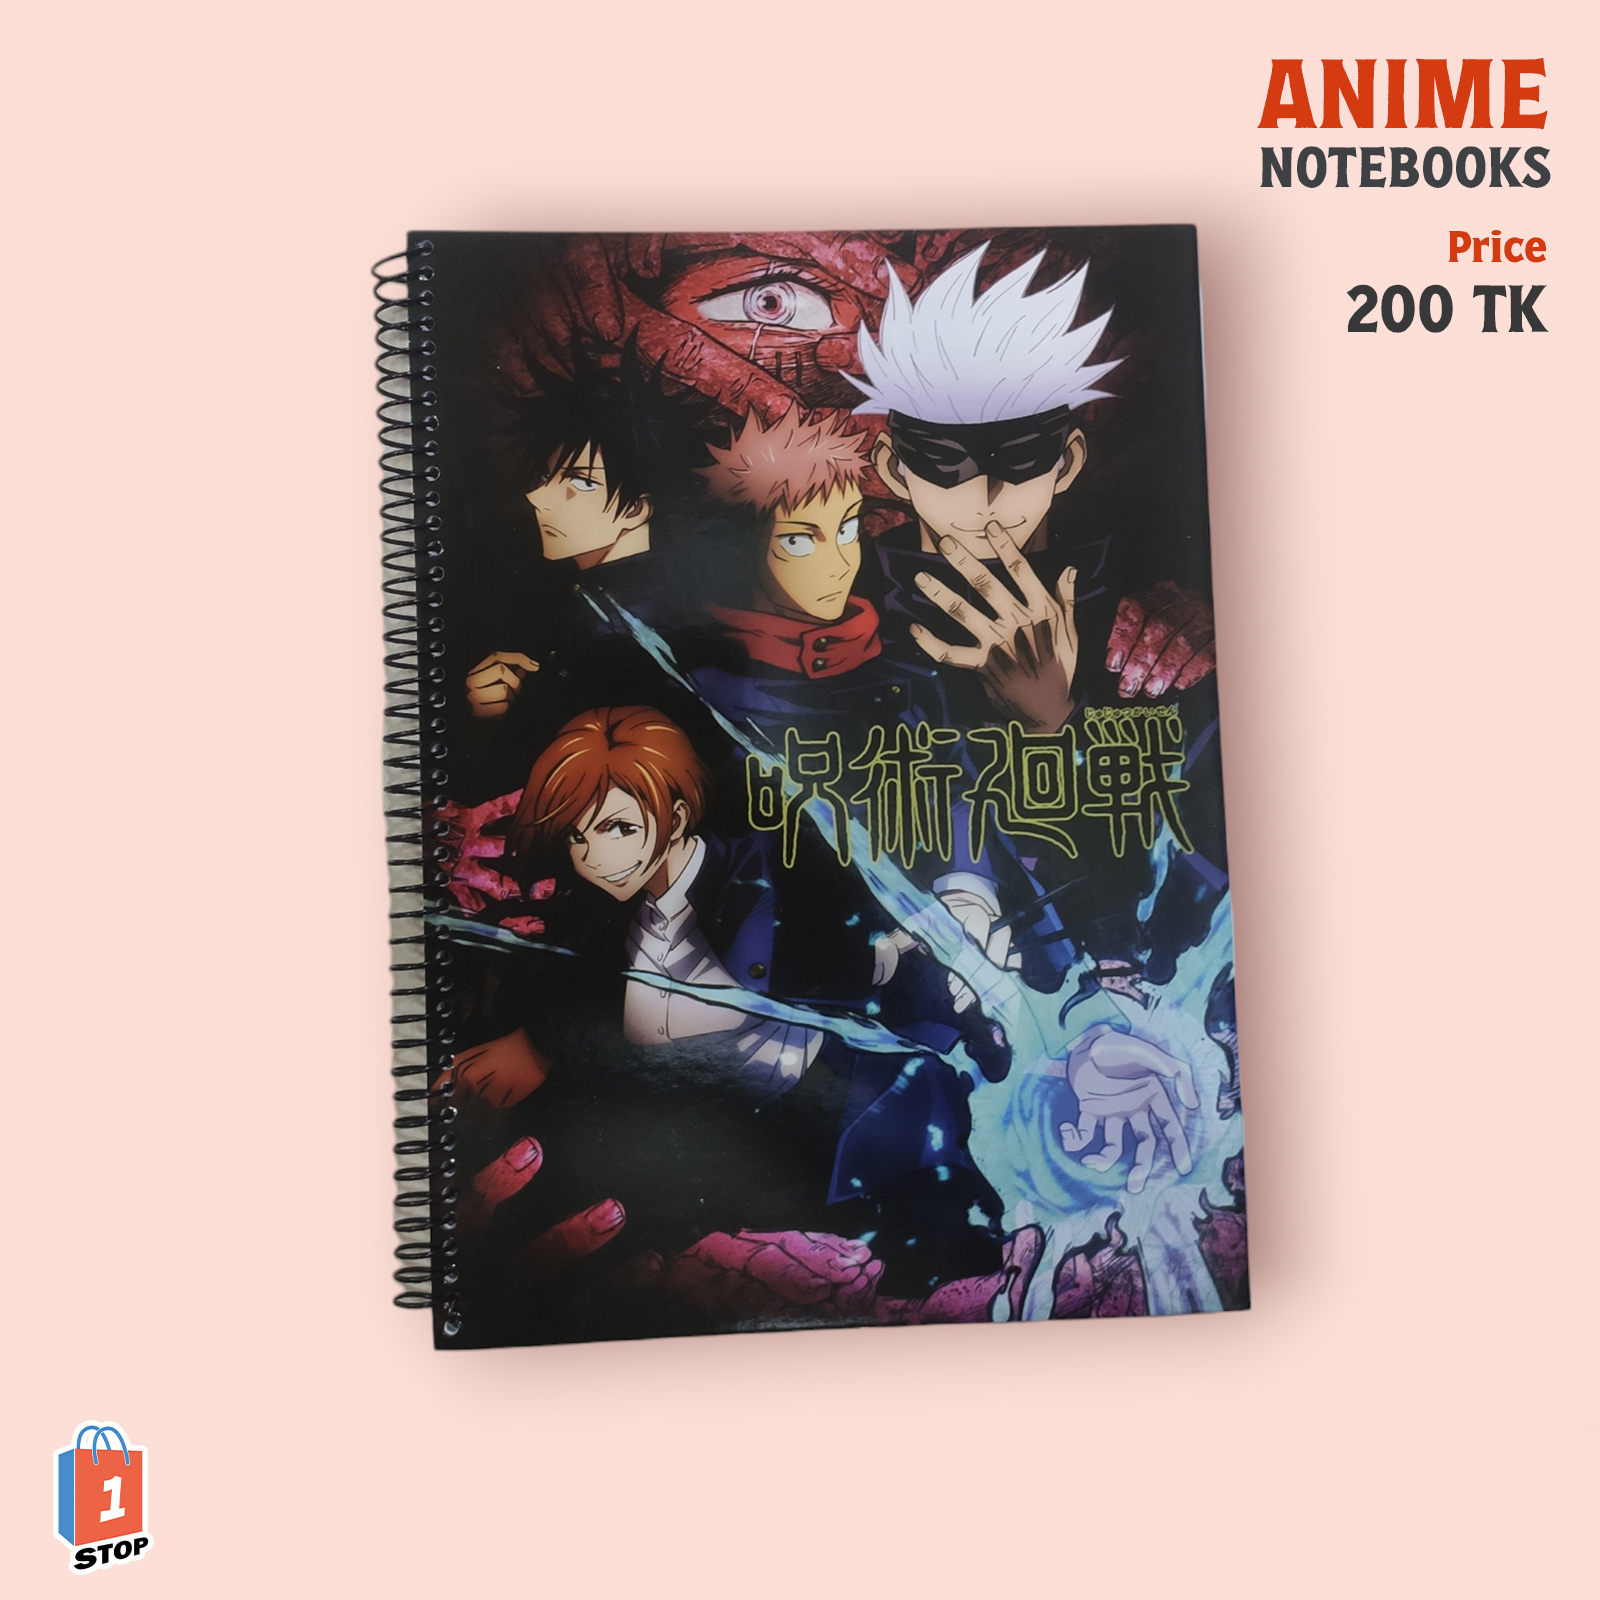 Art Junk - artworks and graphics - 11 // anime notebook covers - Wattpad